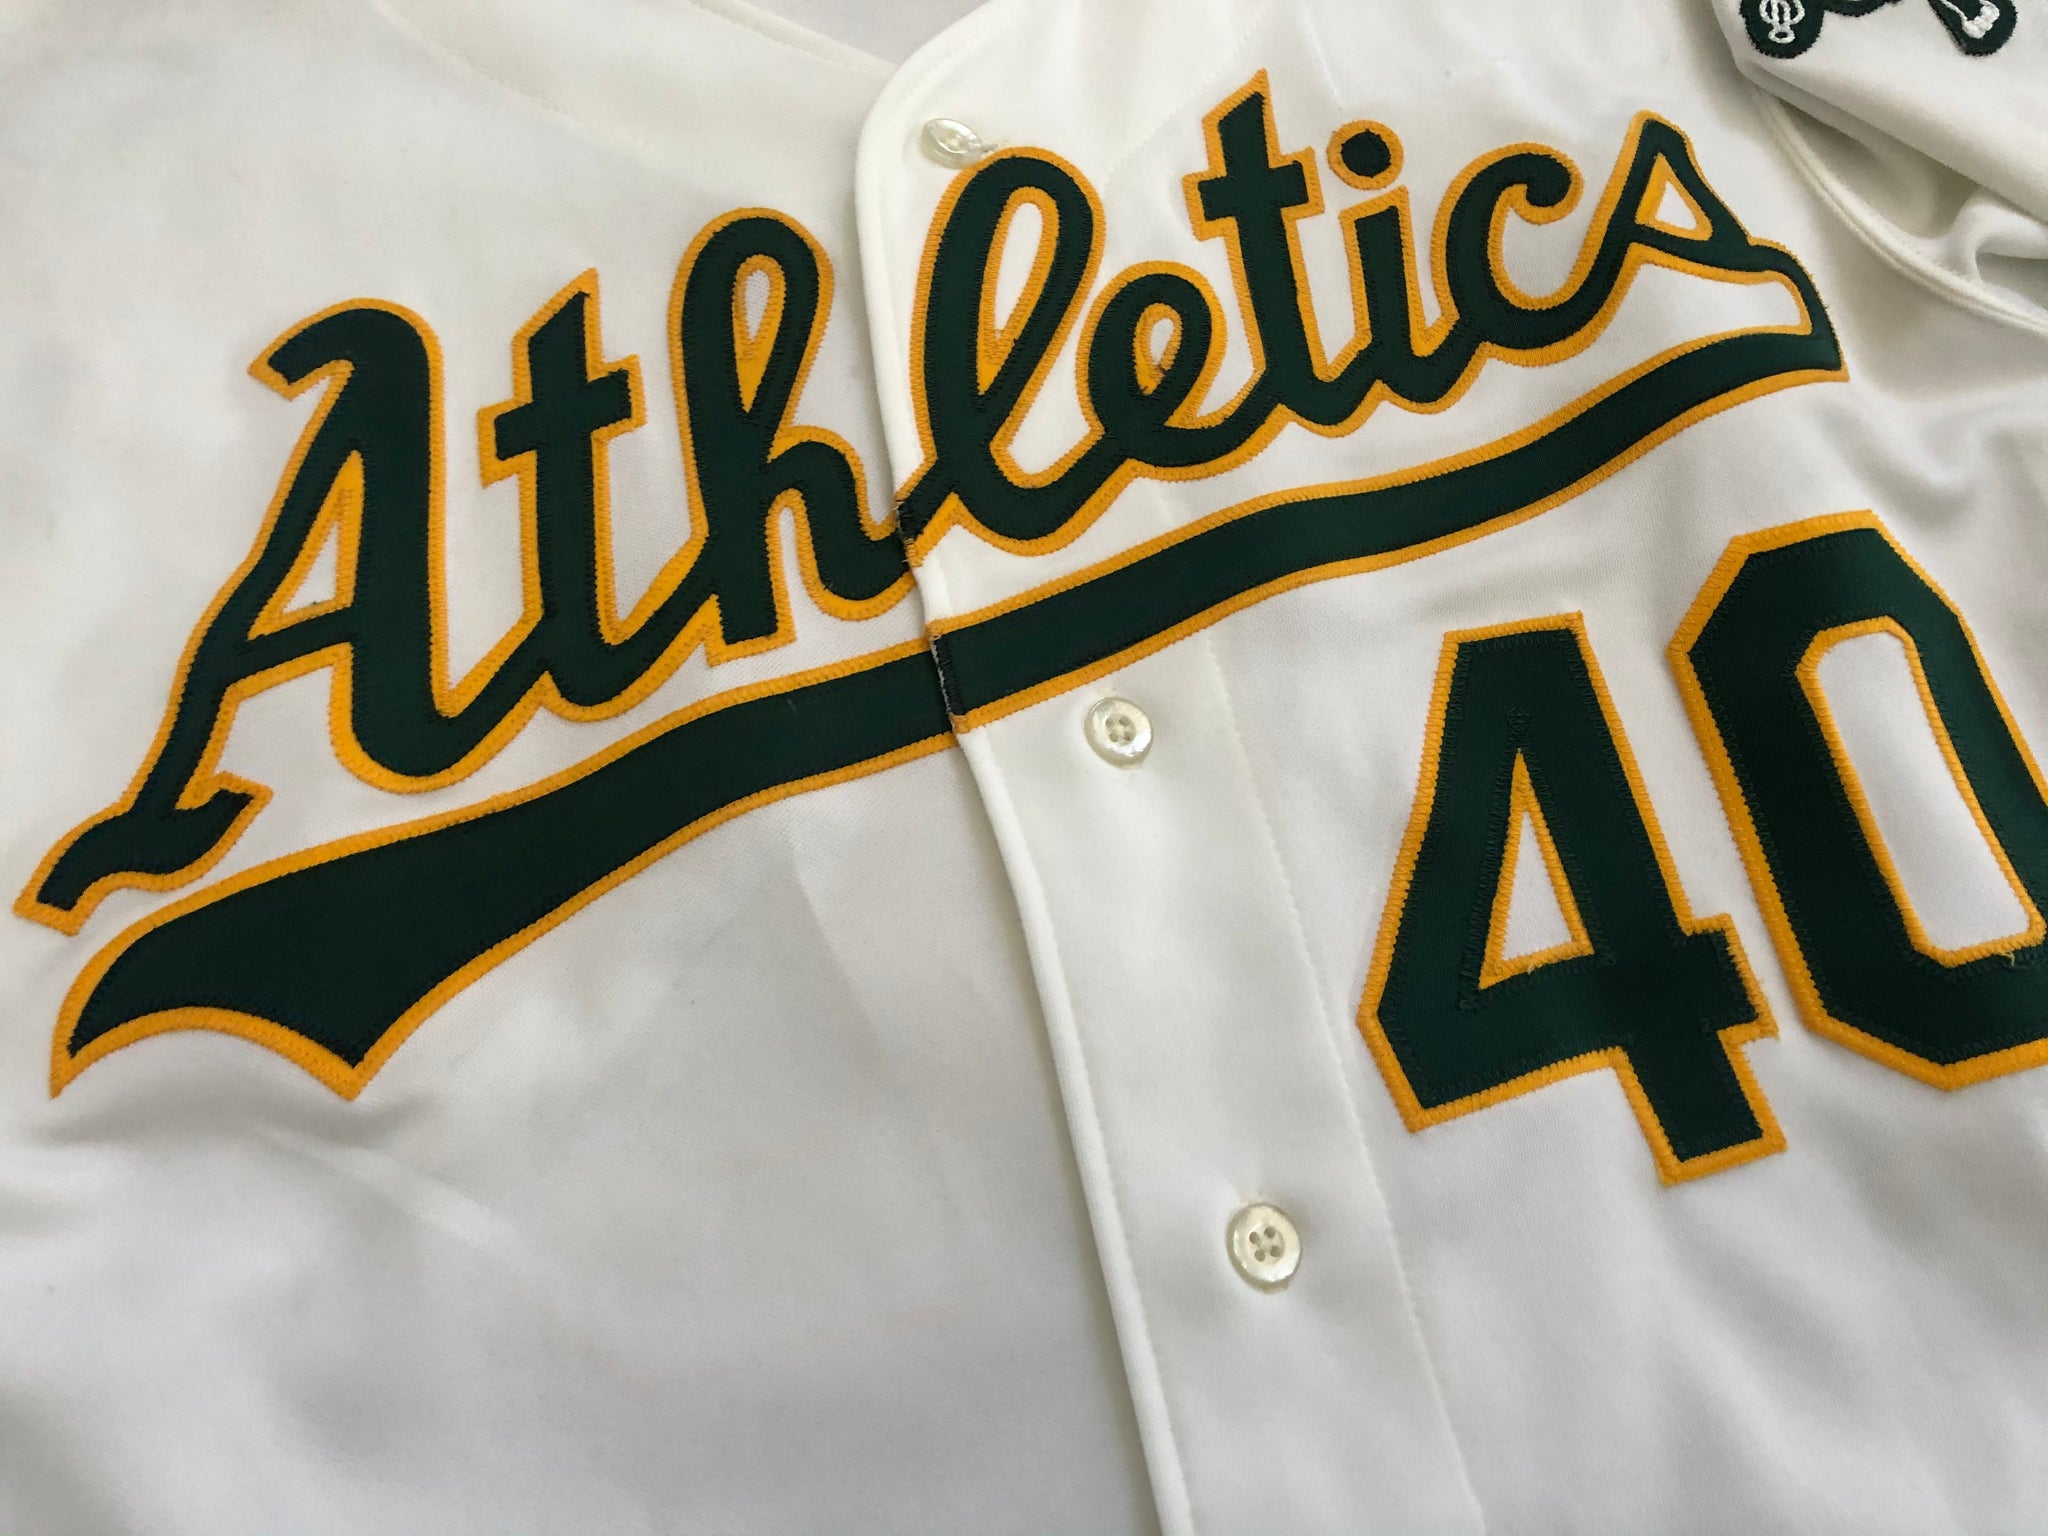 Vintage Rawlings Oakland Athletics A's Home Jersey USA Made in